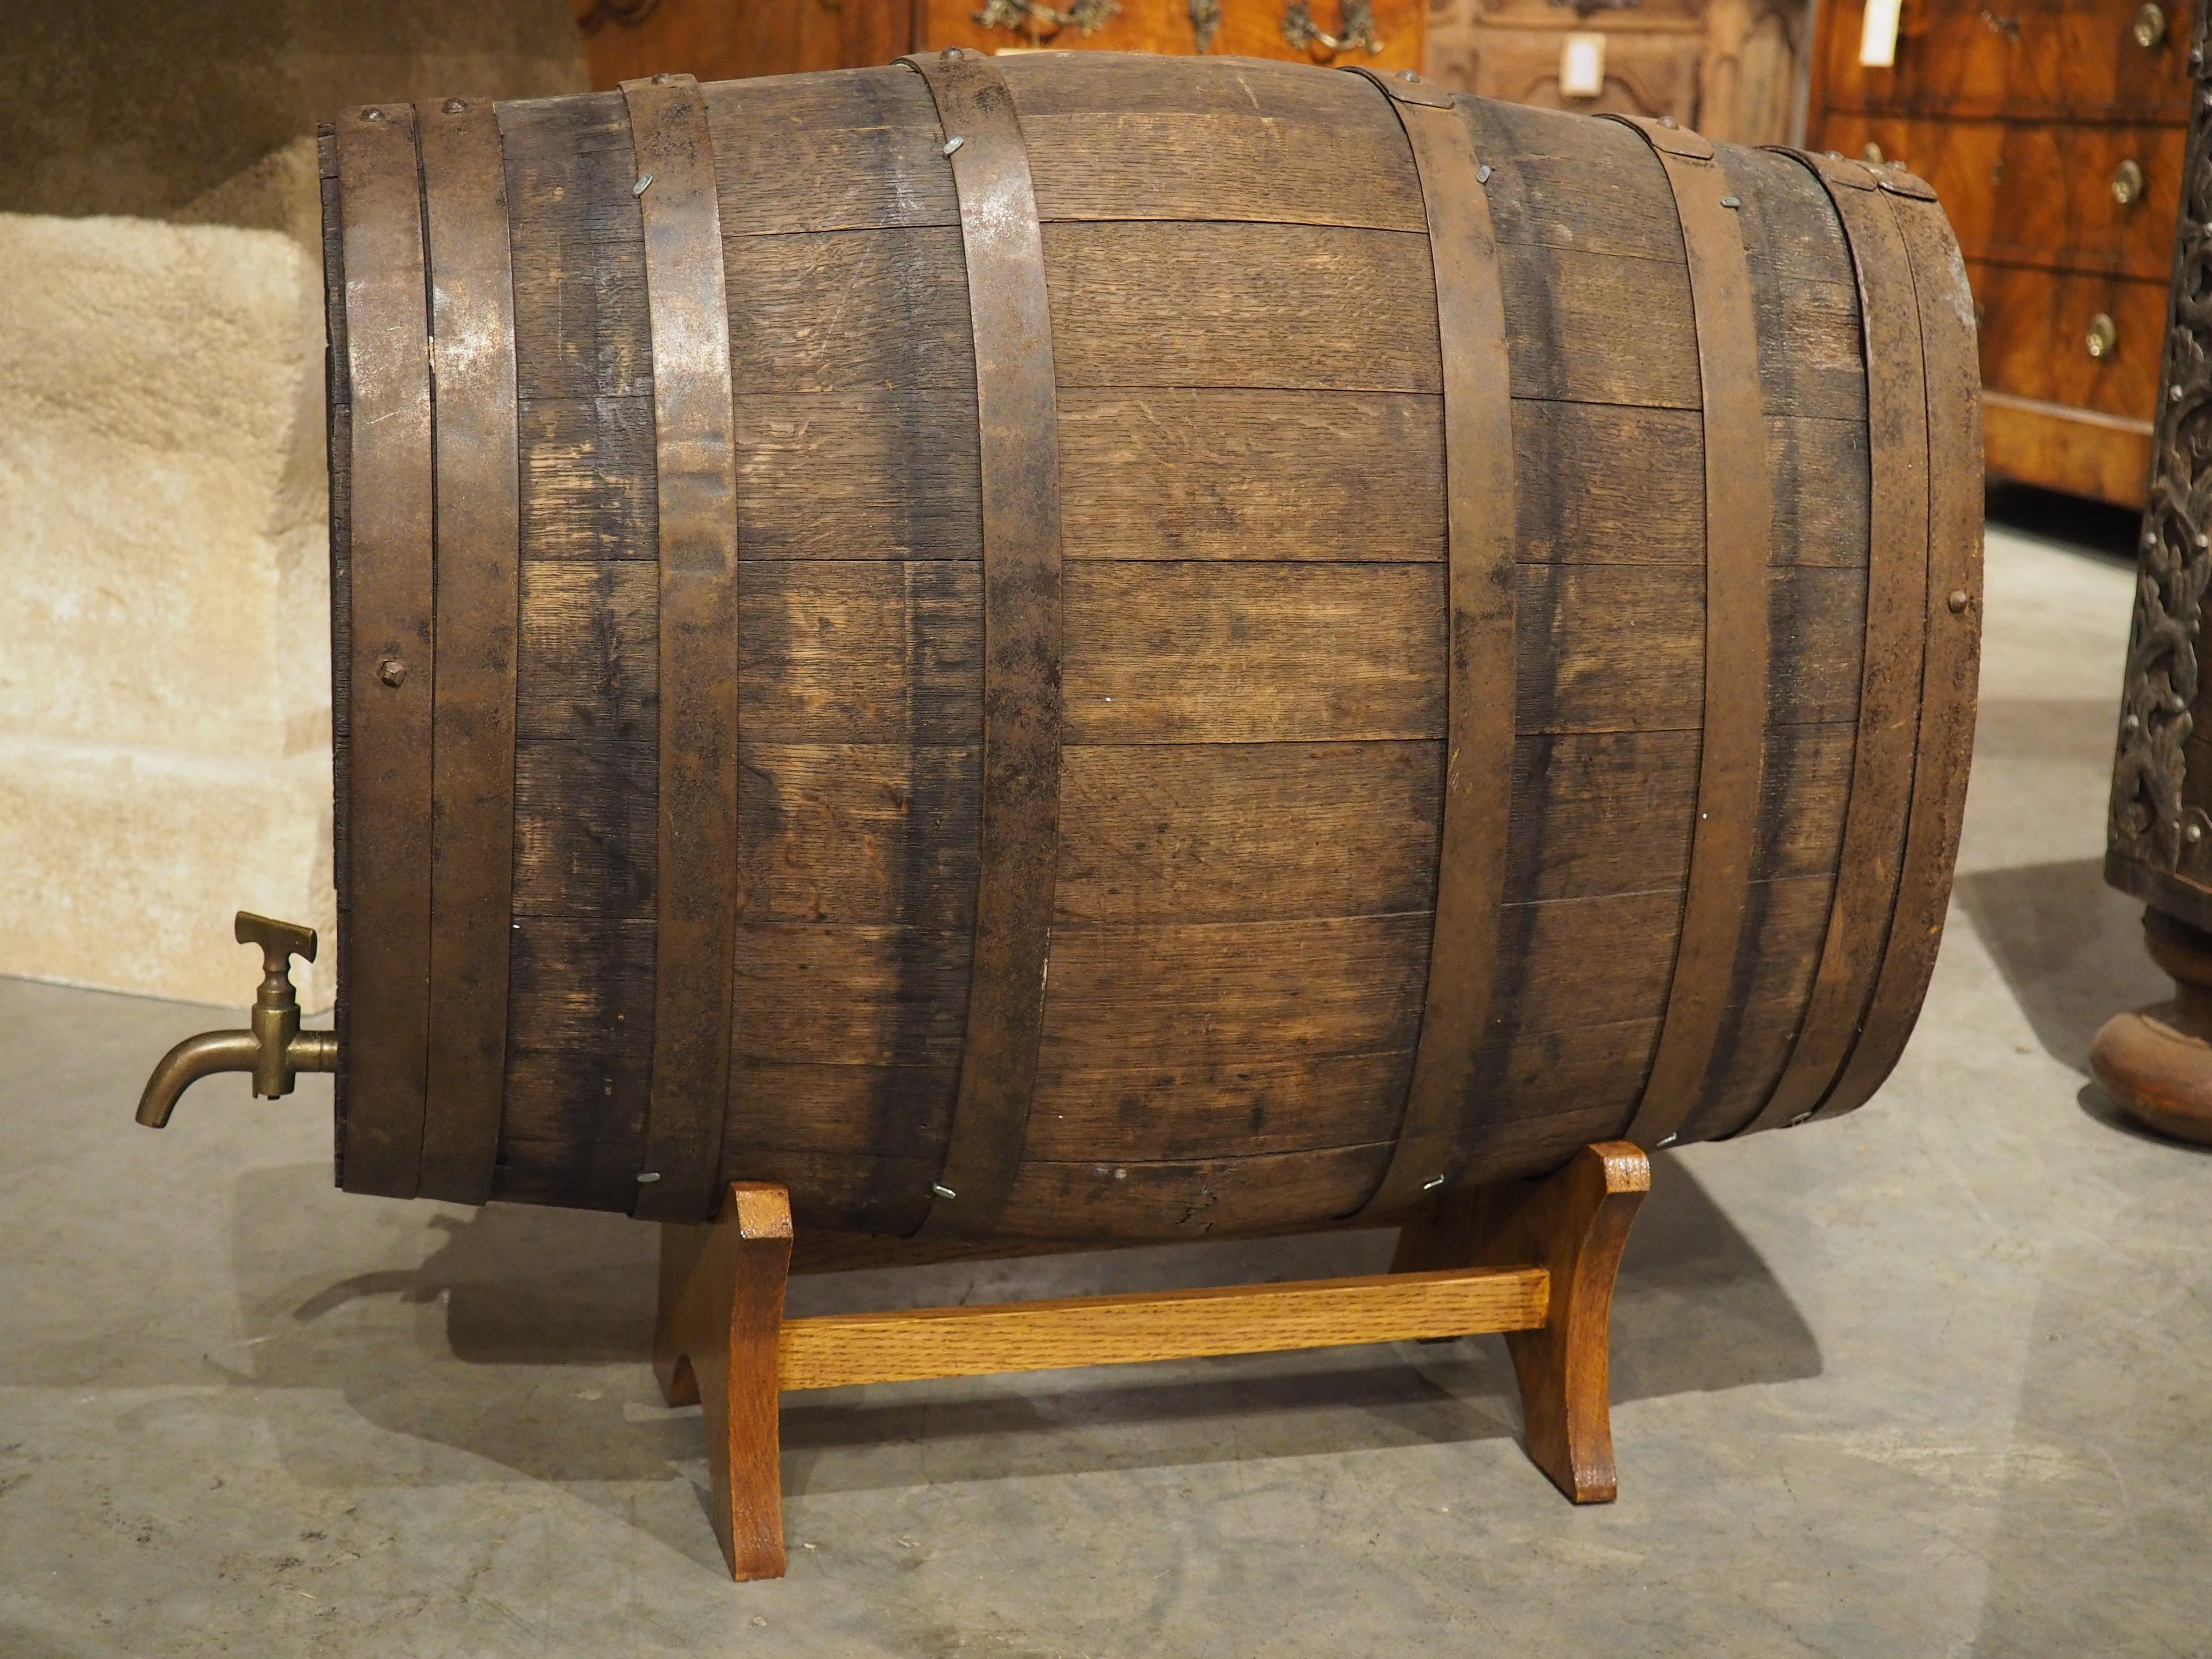 A must-have for any wine lover, this oak calvados barrel was hand-carved in France, circa 1850. Calvados is an apple and pear brandy specifically manufactured in Normandy, with the first known record of production dating to 1553. The ovate barrel is